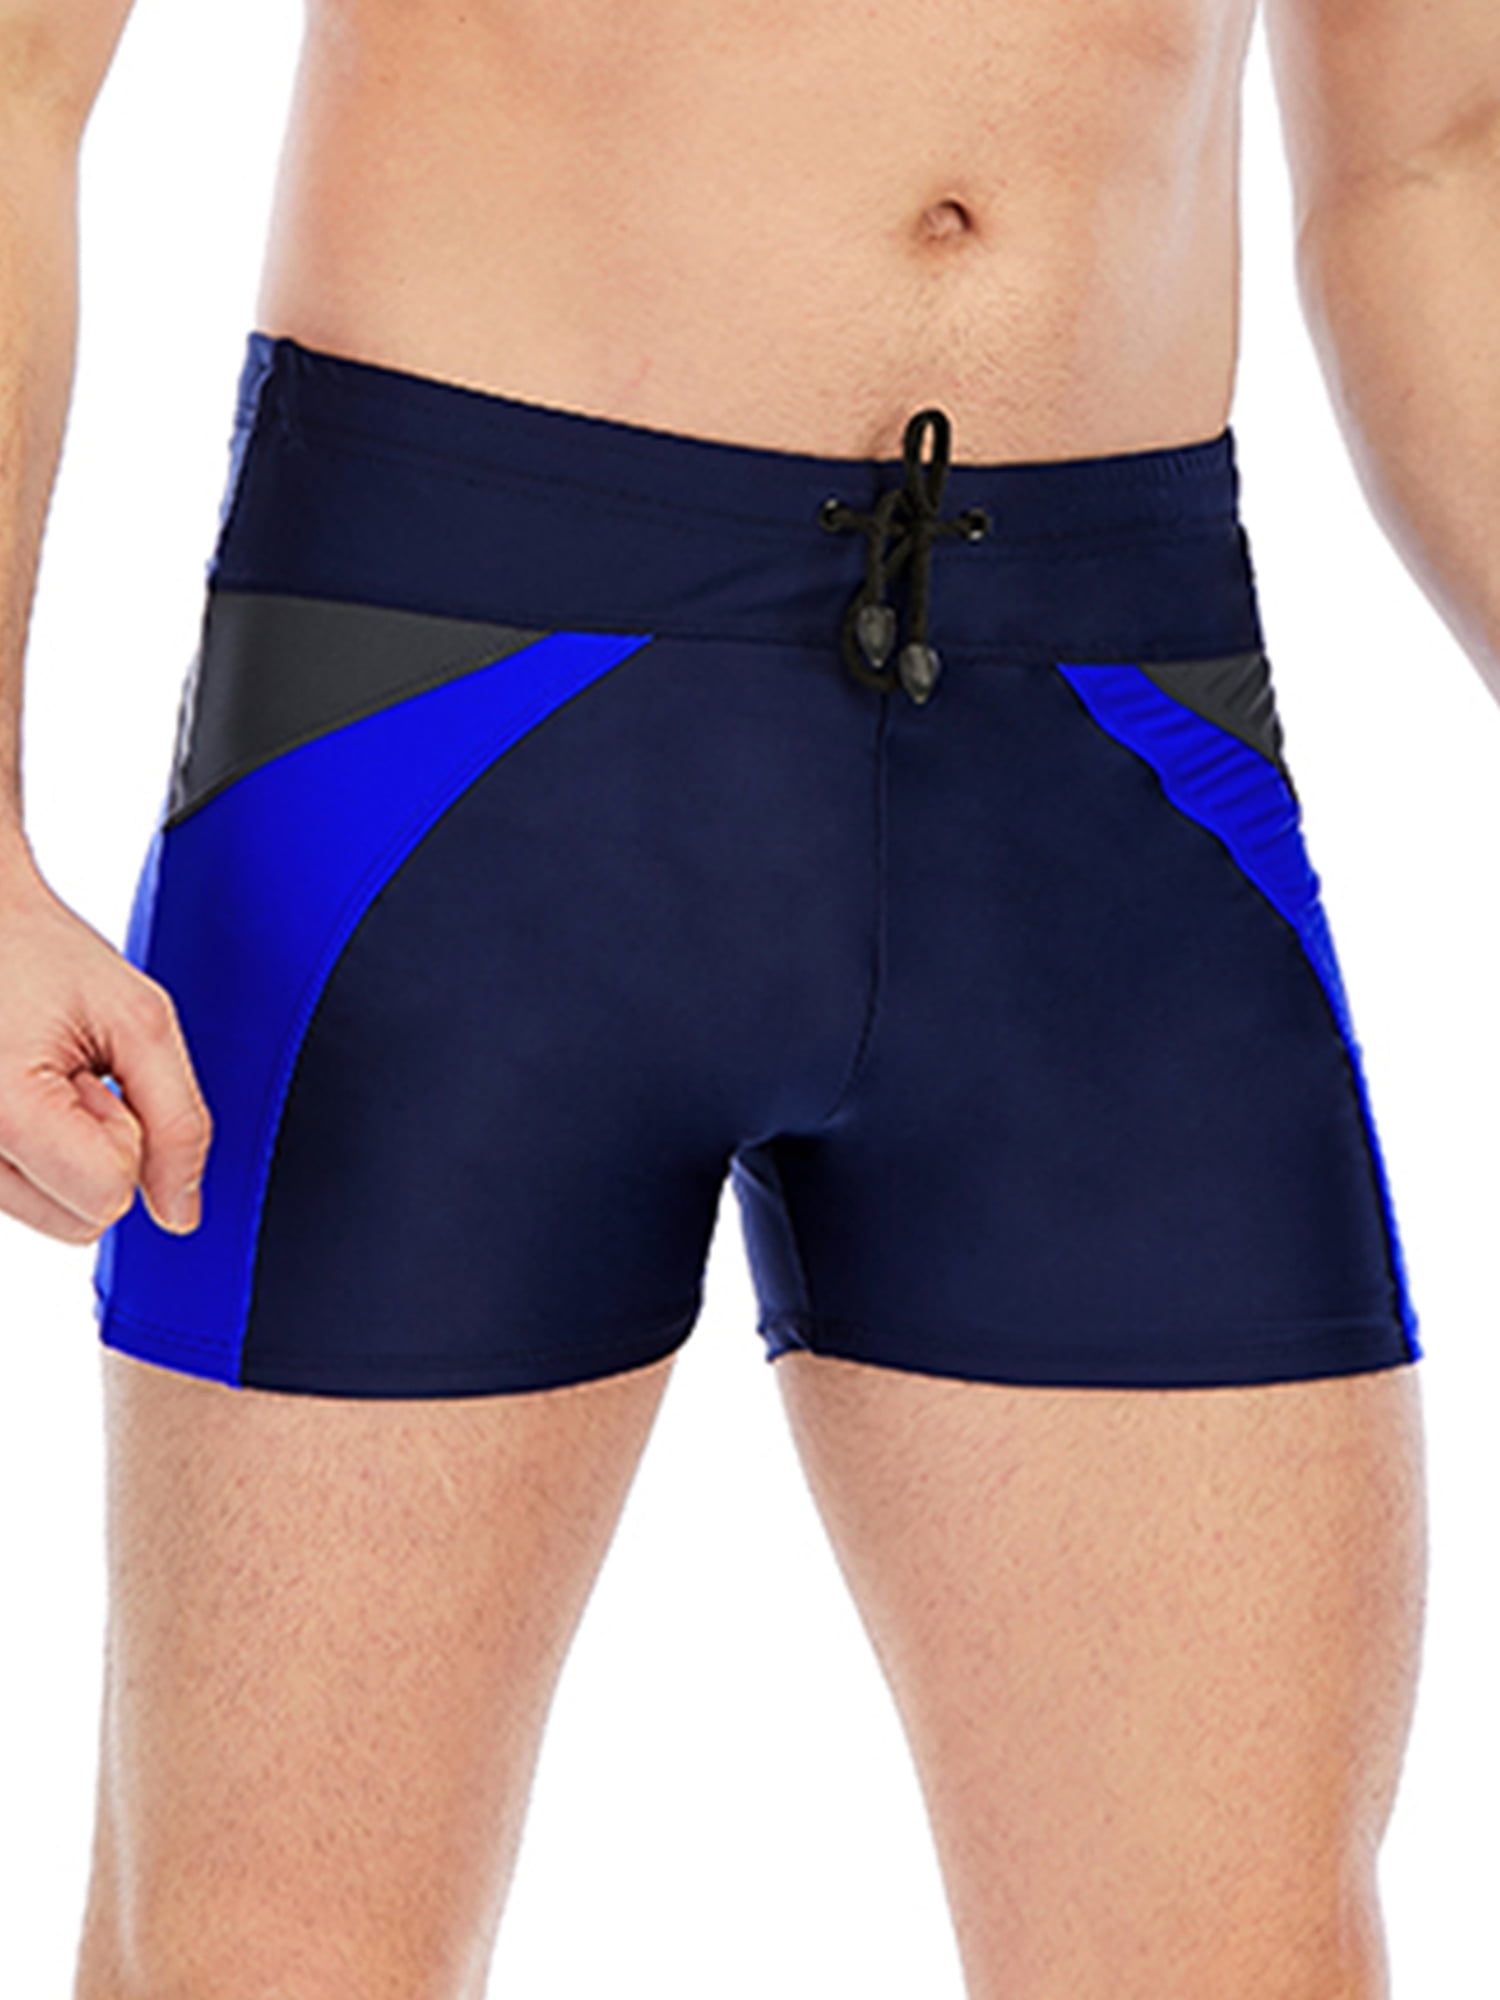 HUGE SPORTS Men's Rash Guard Swim Shorts Compression Swimming Jammer Cool Dry Active Swimsuit Workout Shorts Sports Tights 